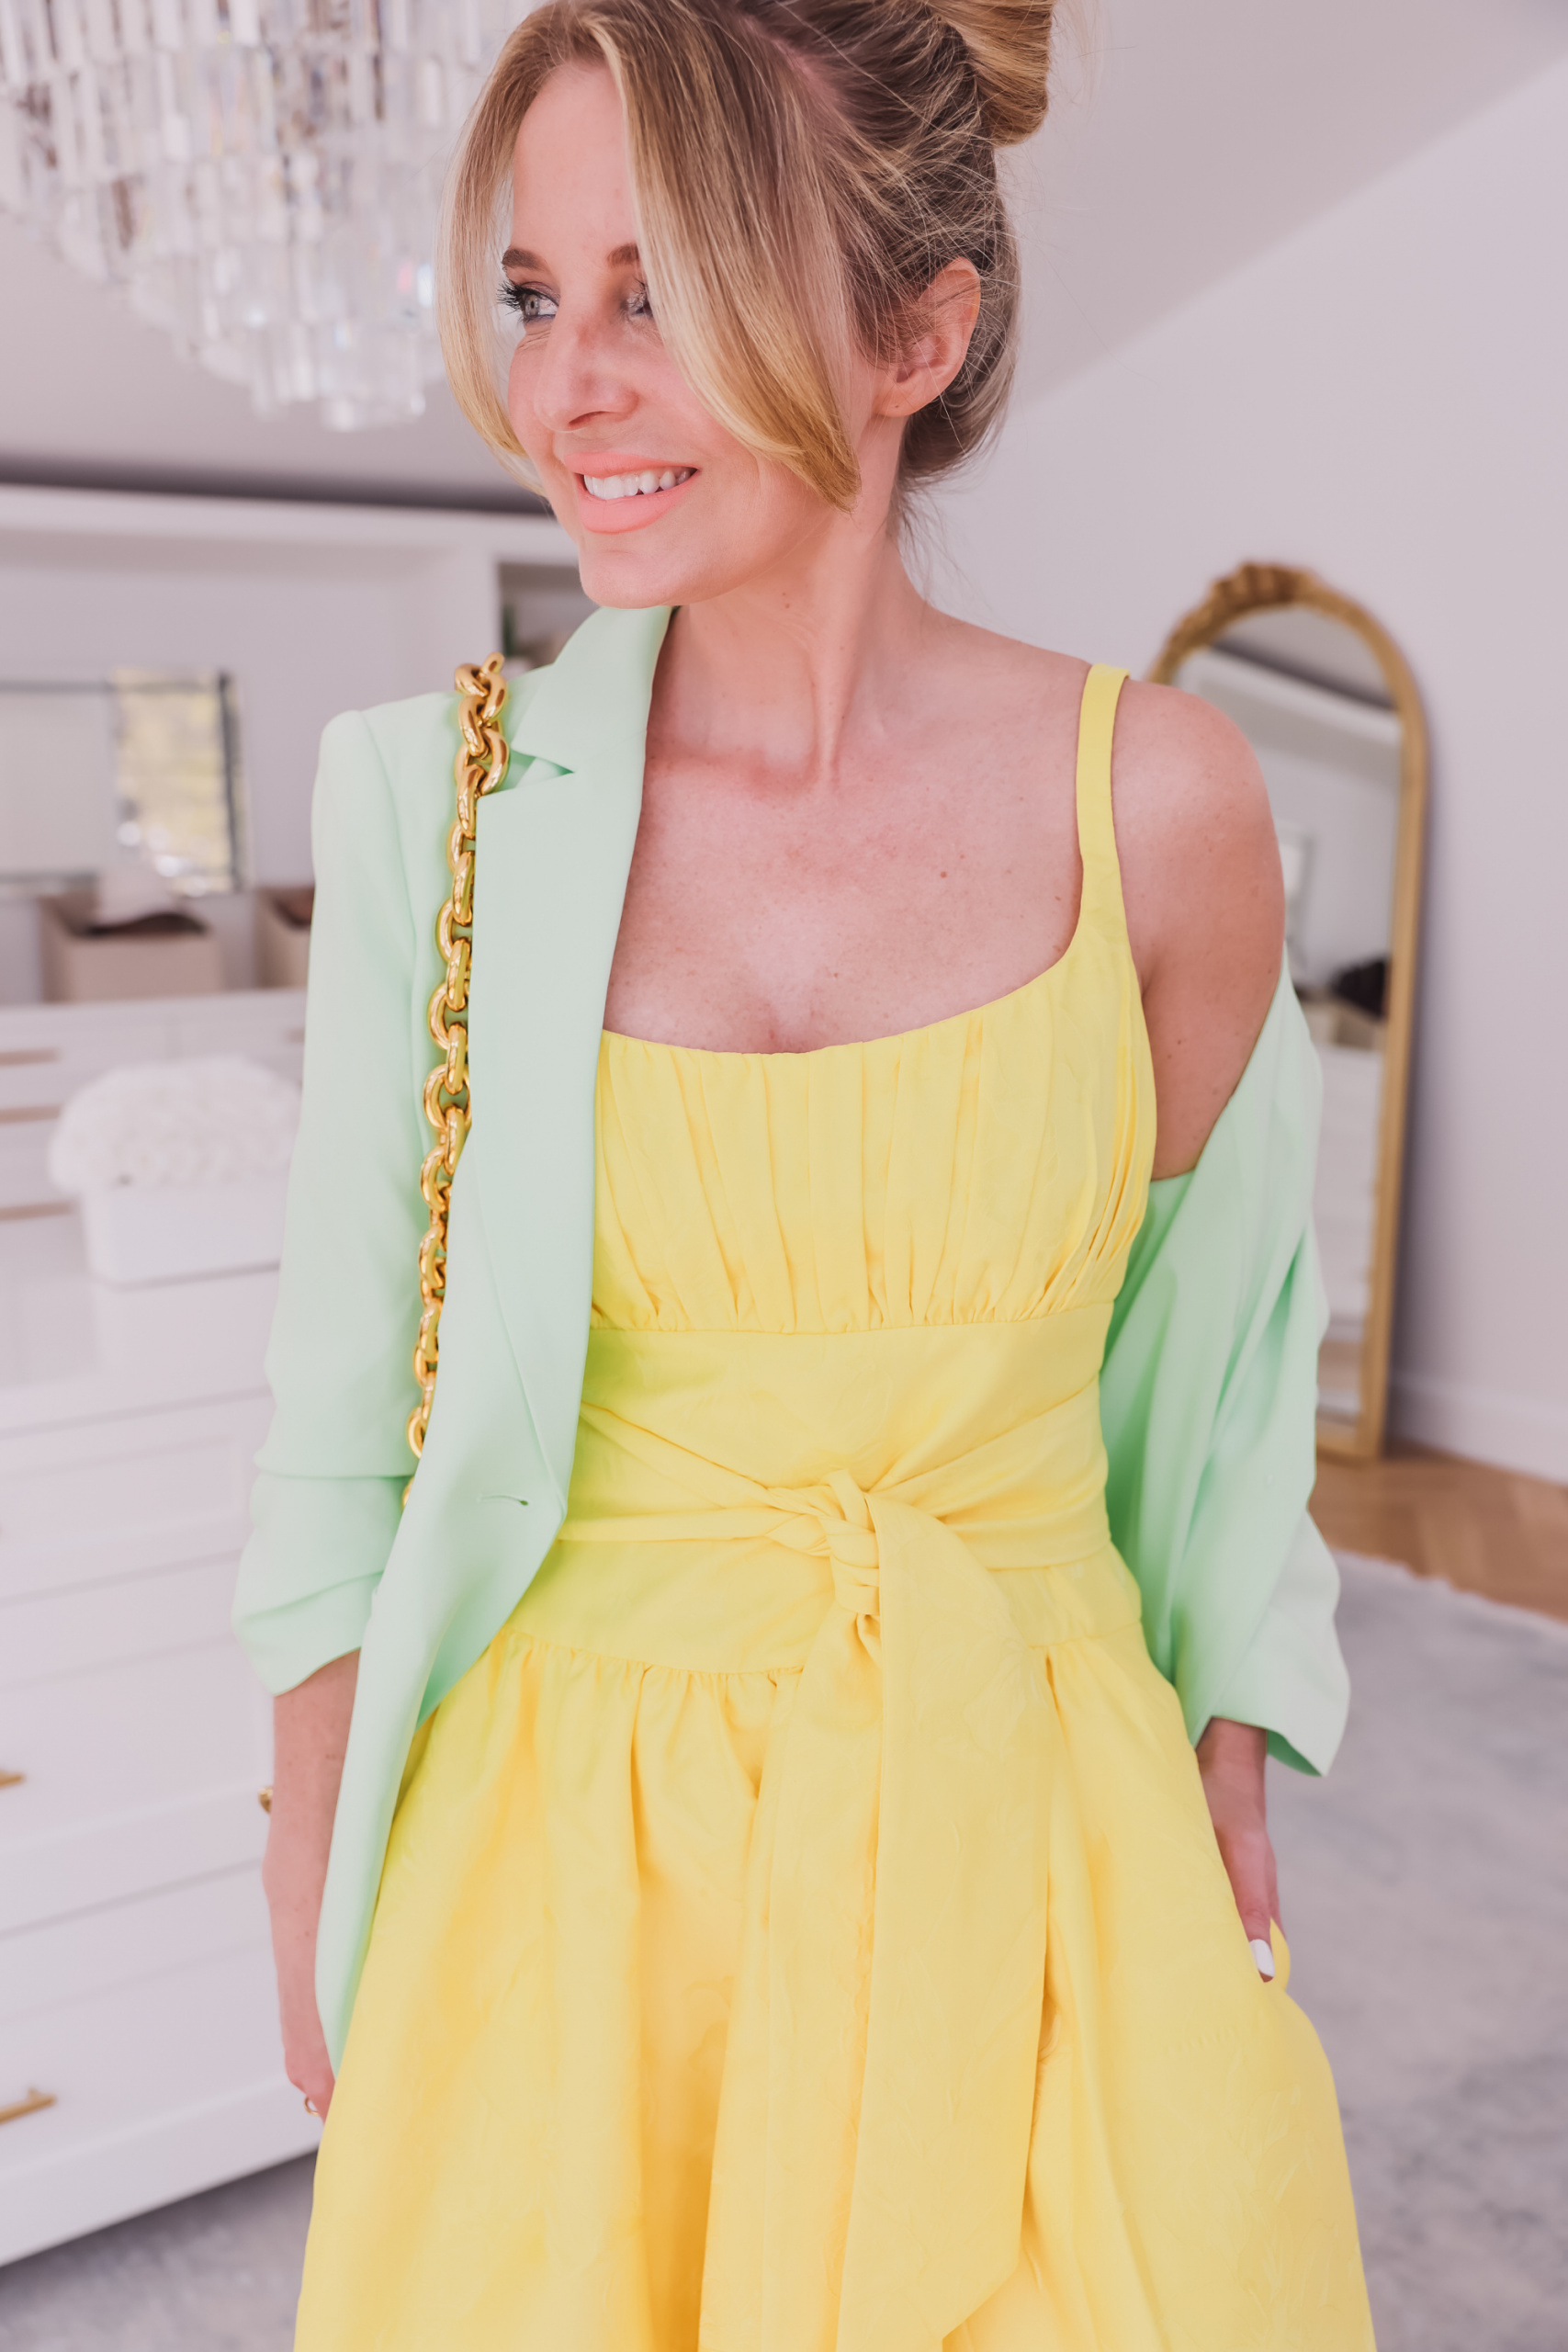 paster green blazer and yellow dress